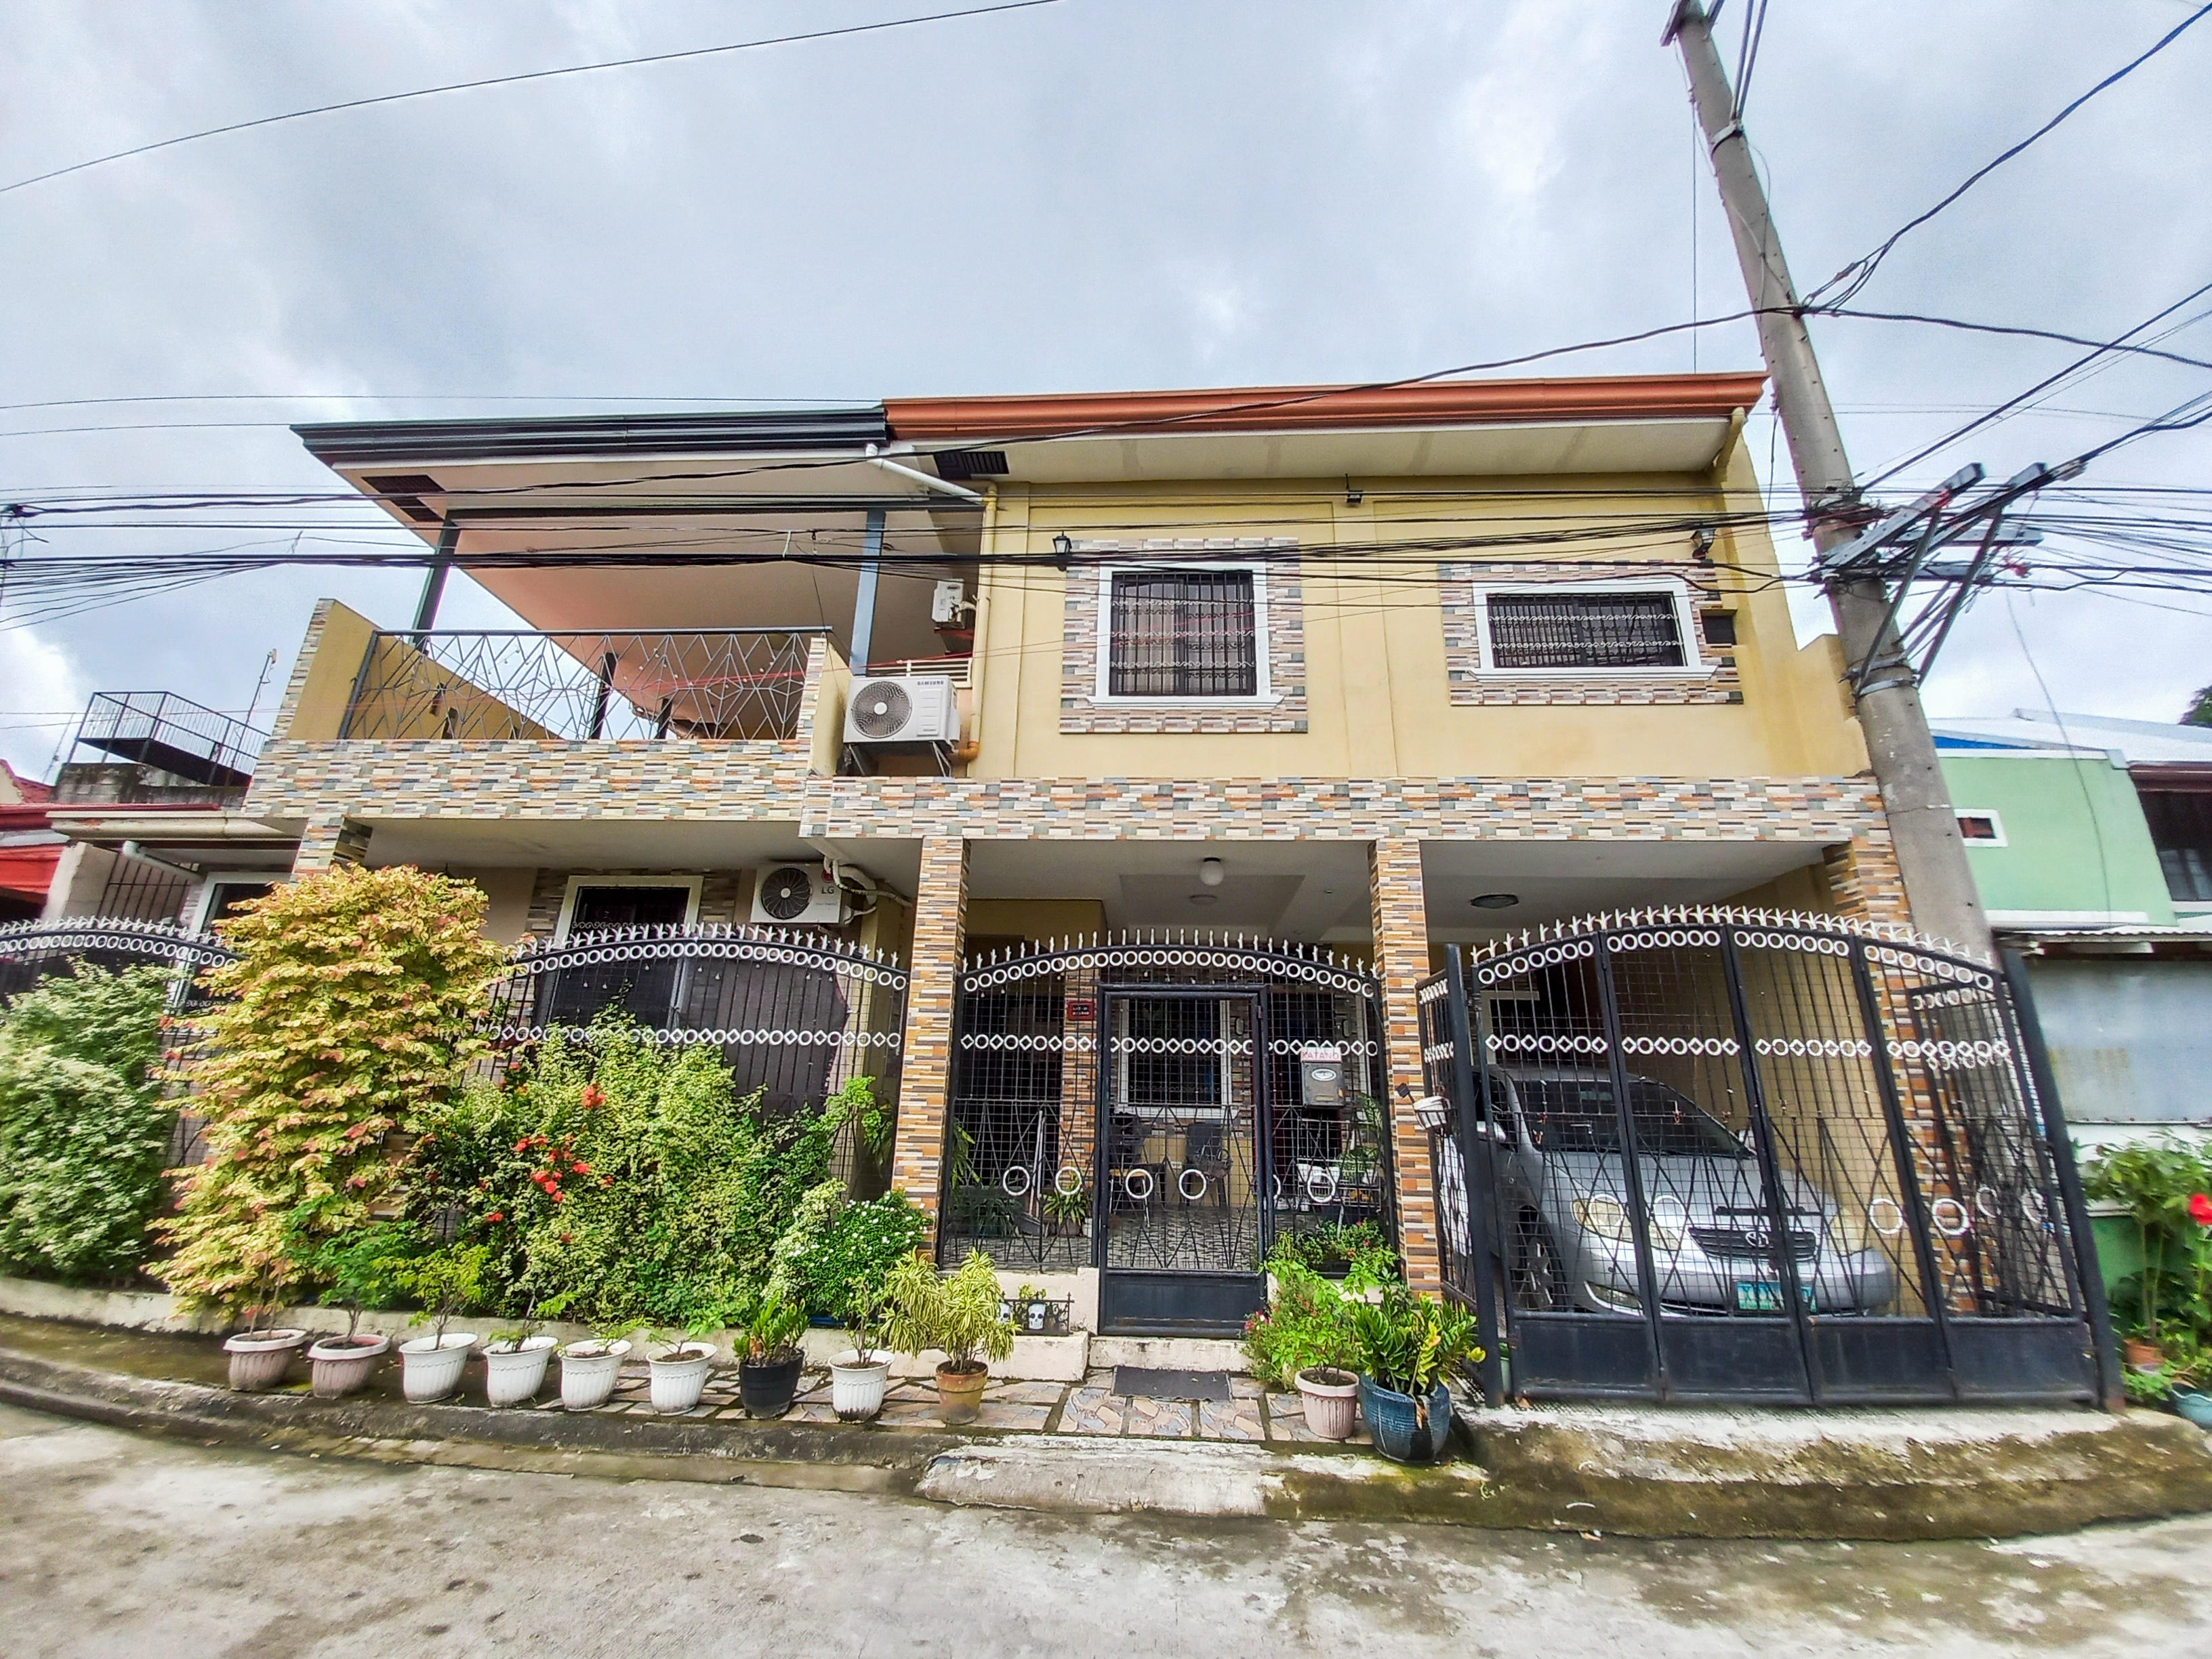 FOR SALE: Fully Furnished 2-Storey House and Lot with 3 Bedroom and Balcony at Woodlane Subdivision, Imus, Cavite